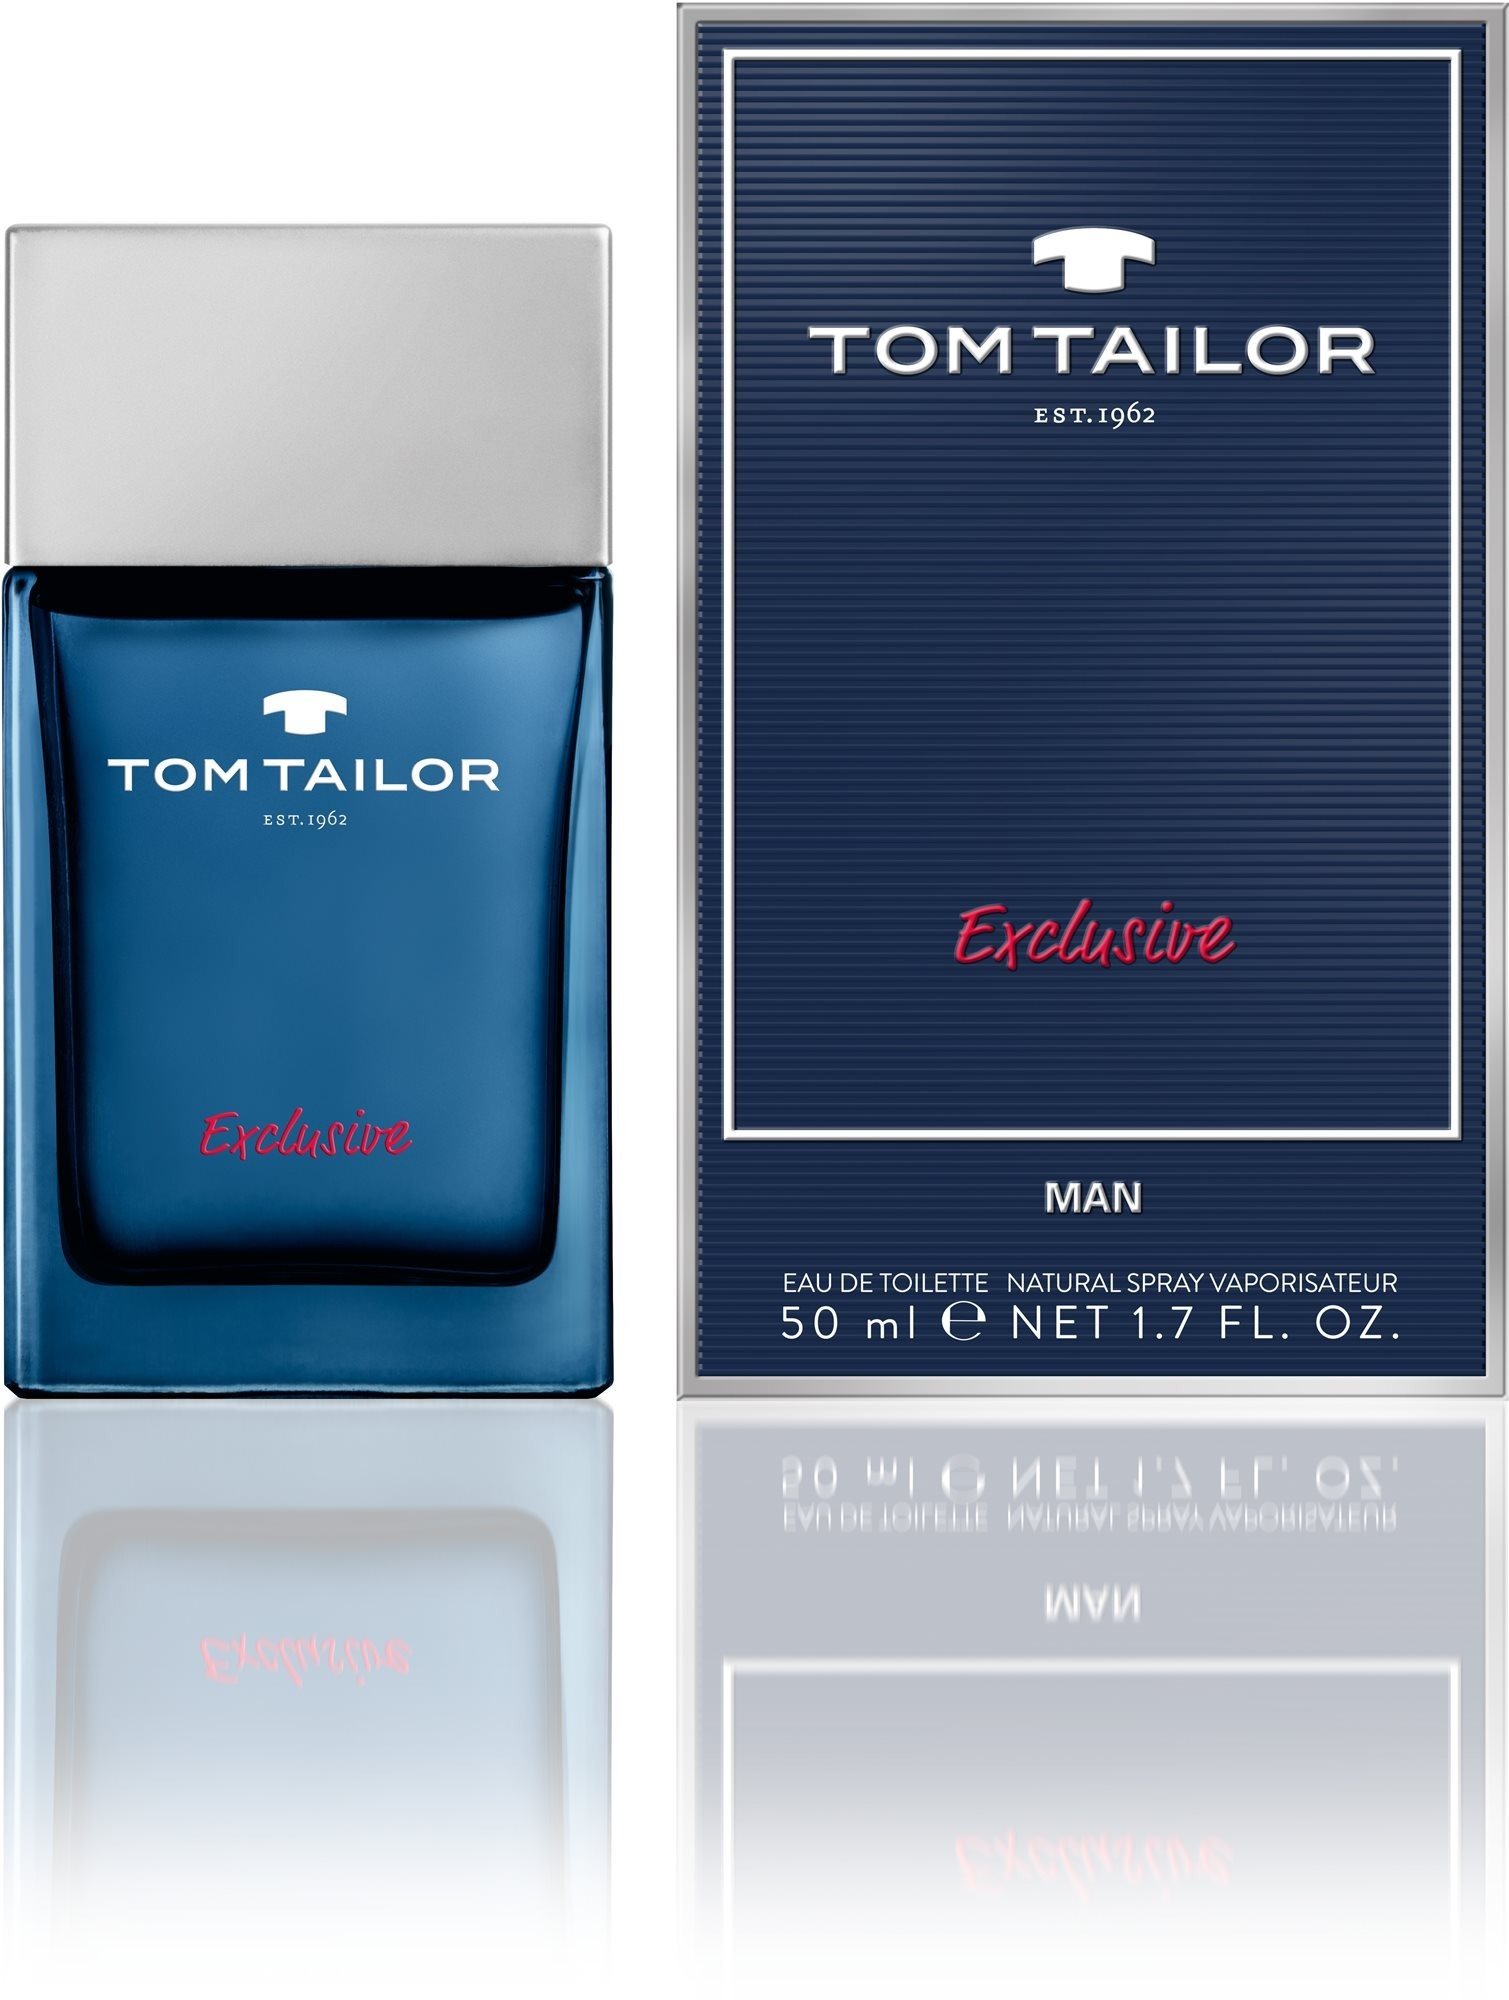 TOM TAILOR Exclusive Man EdT